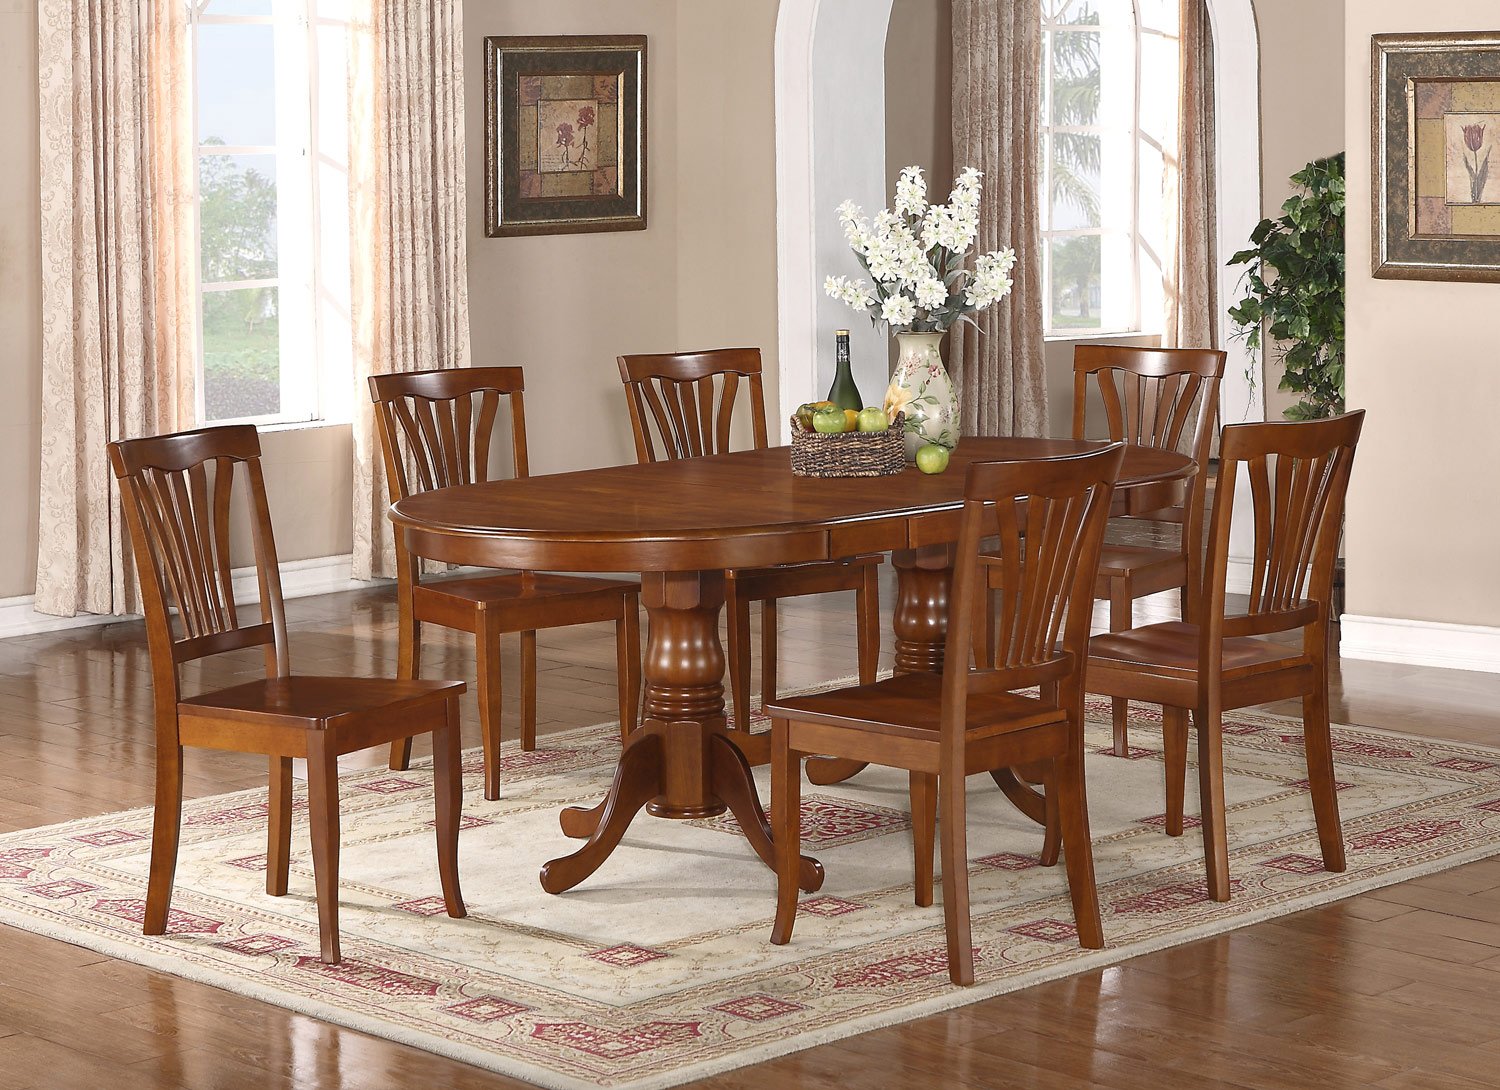 chairs for dining room table